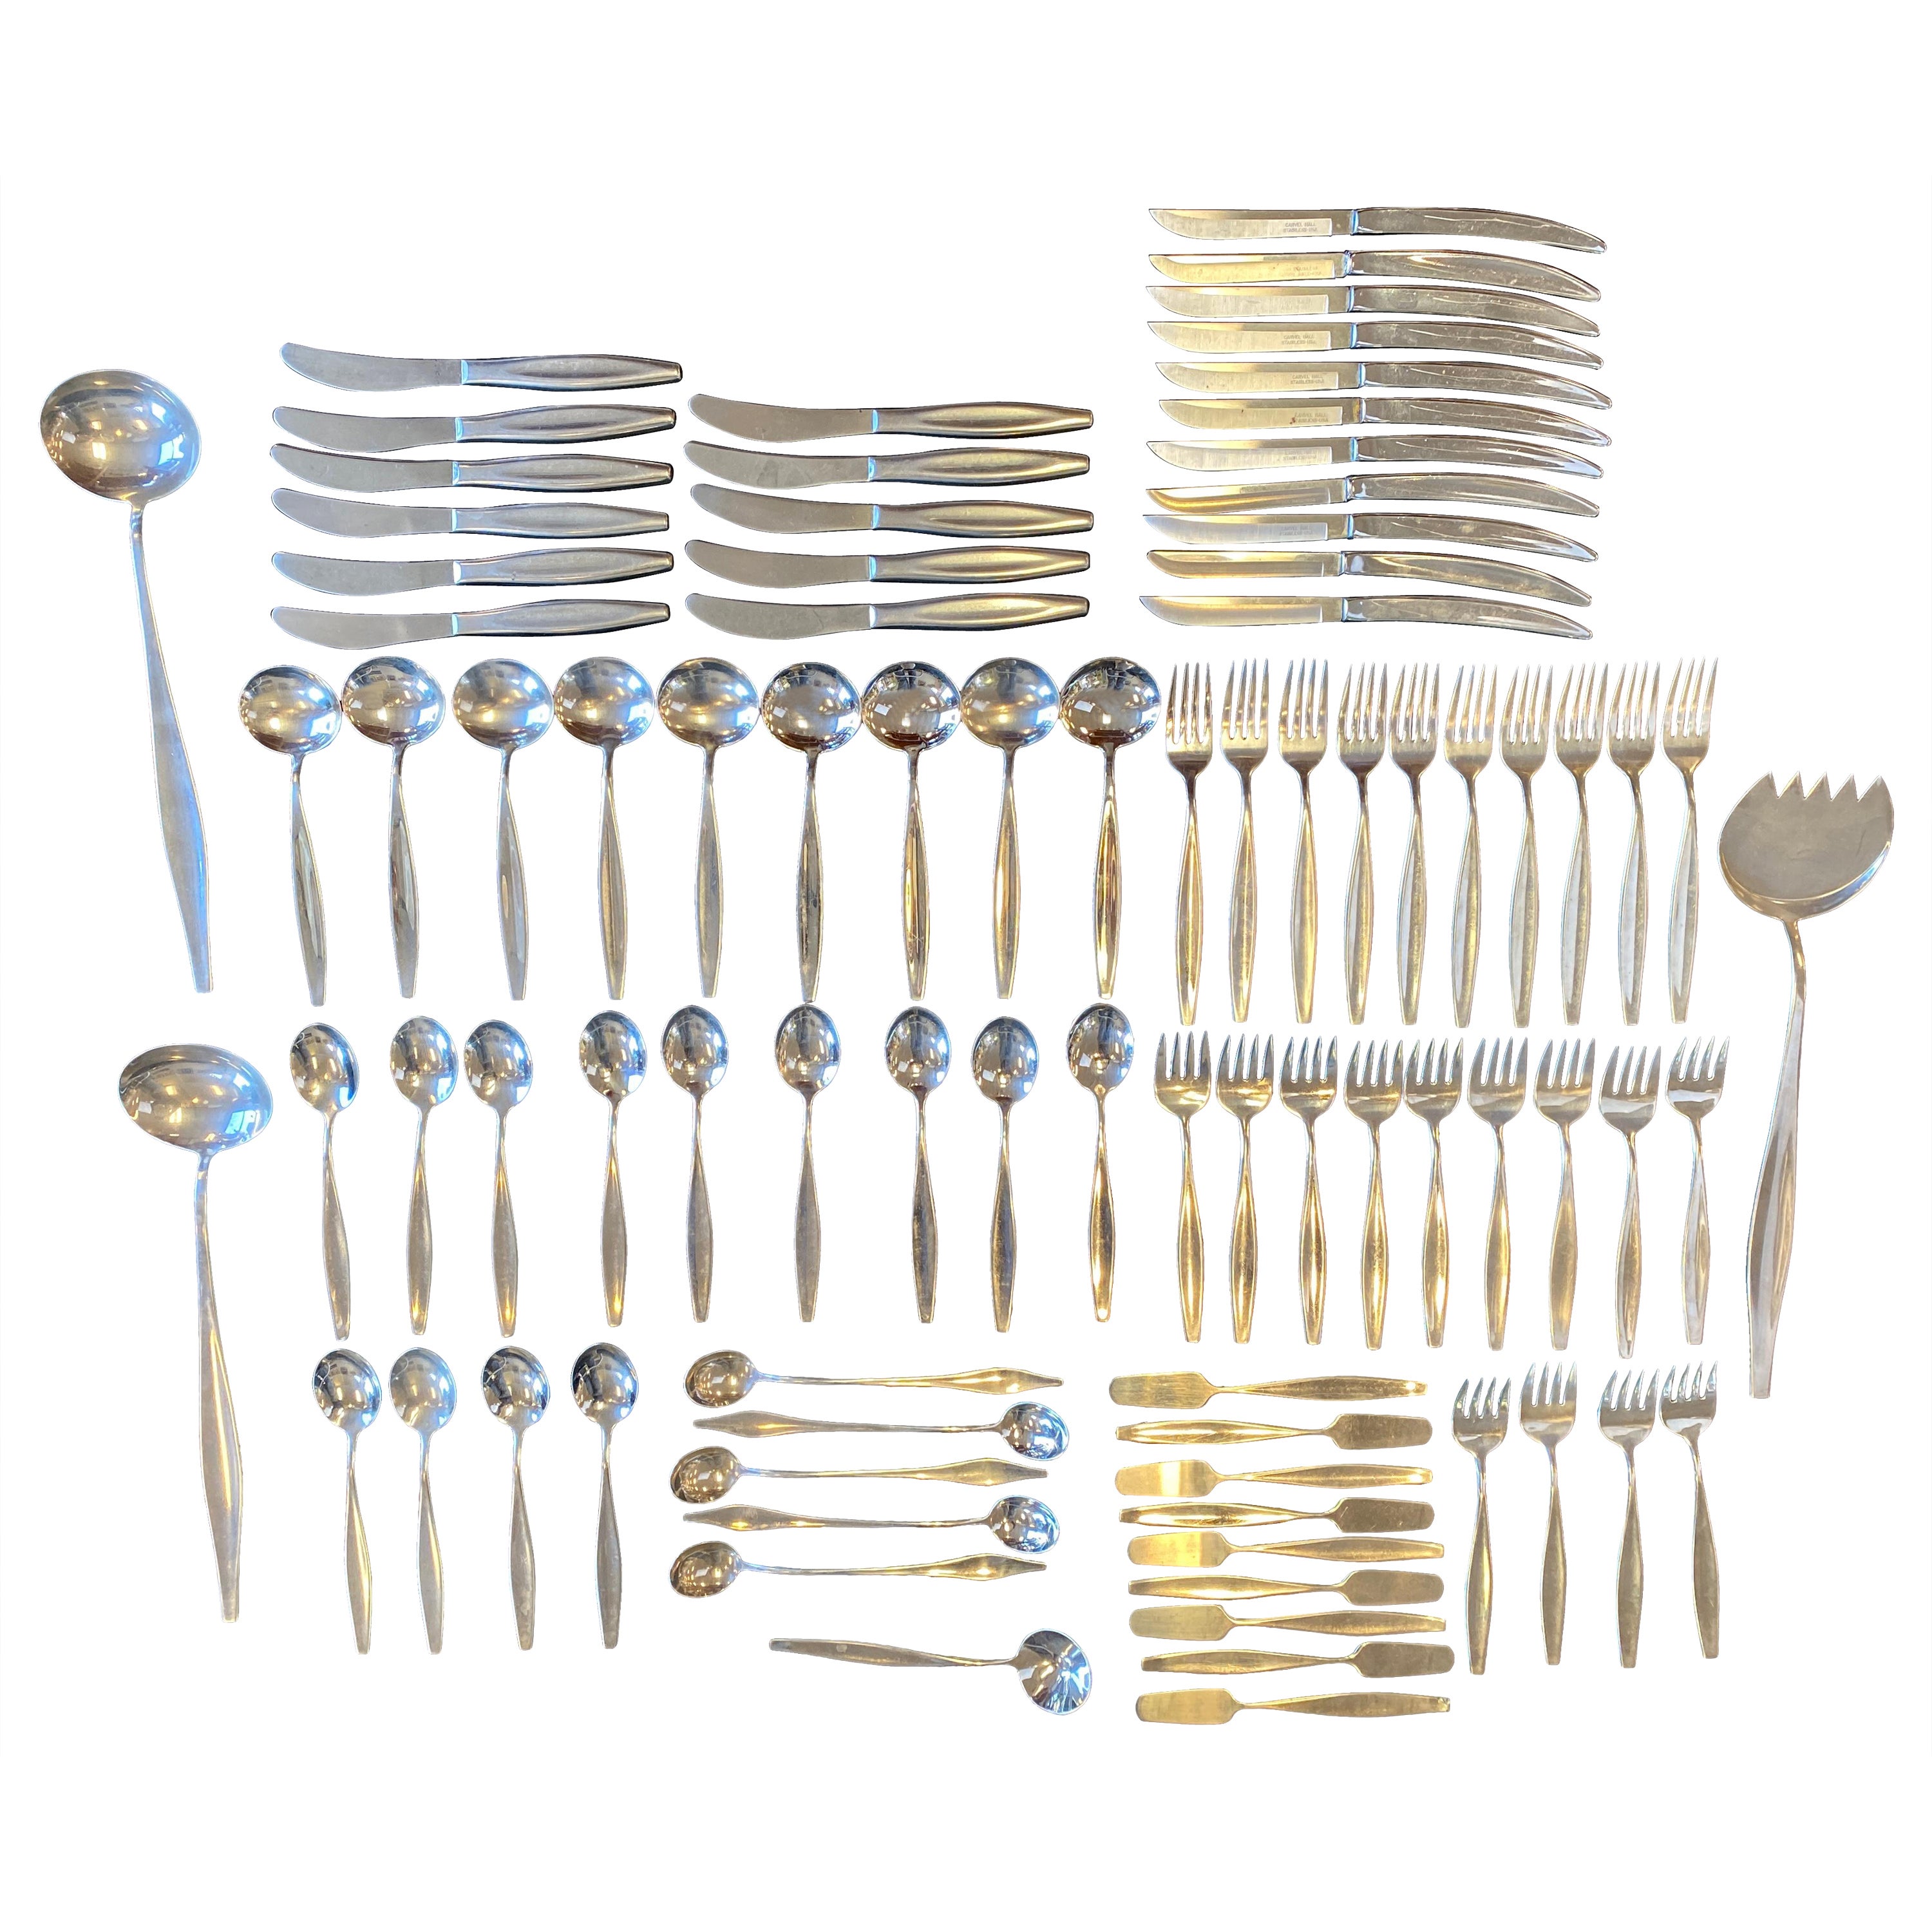 "Leisure" Flatware Designed by George Nelson For Carvel Hall 85 Piece Set